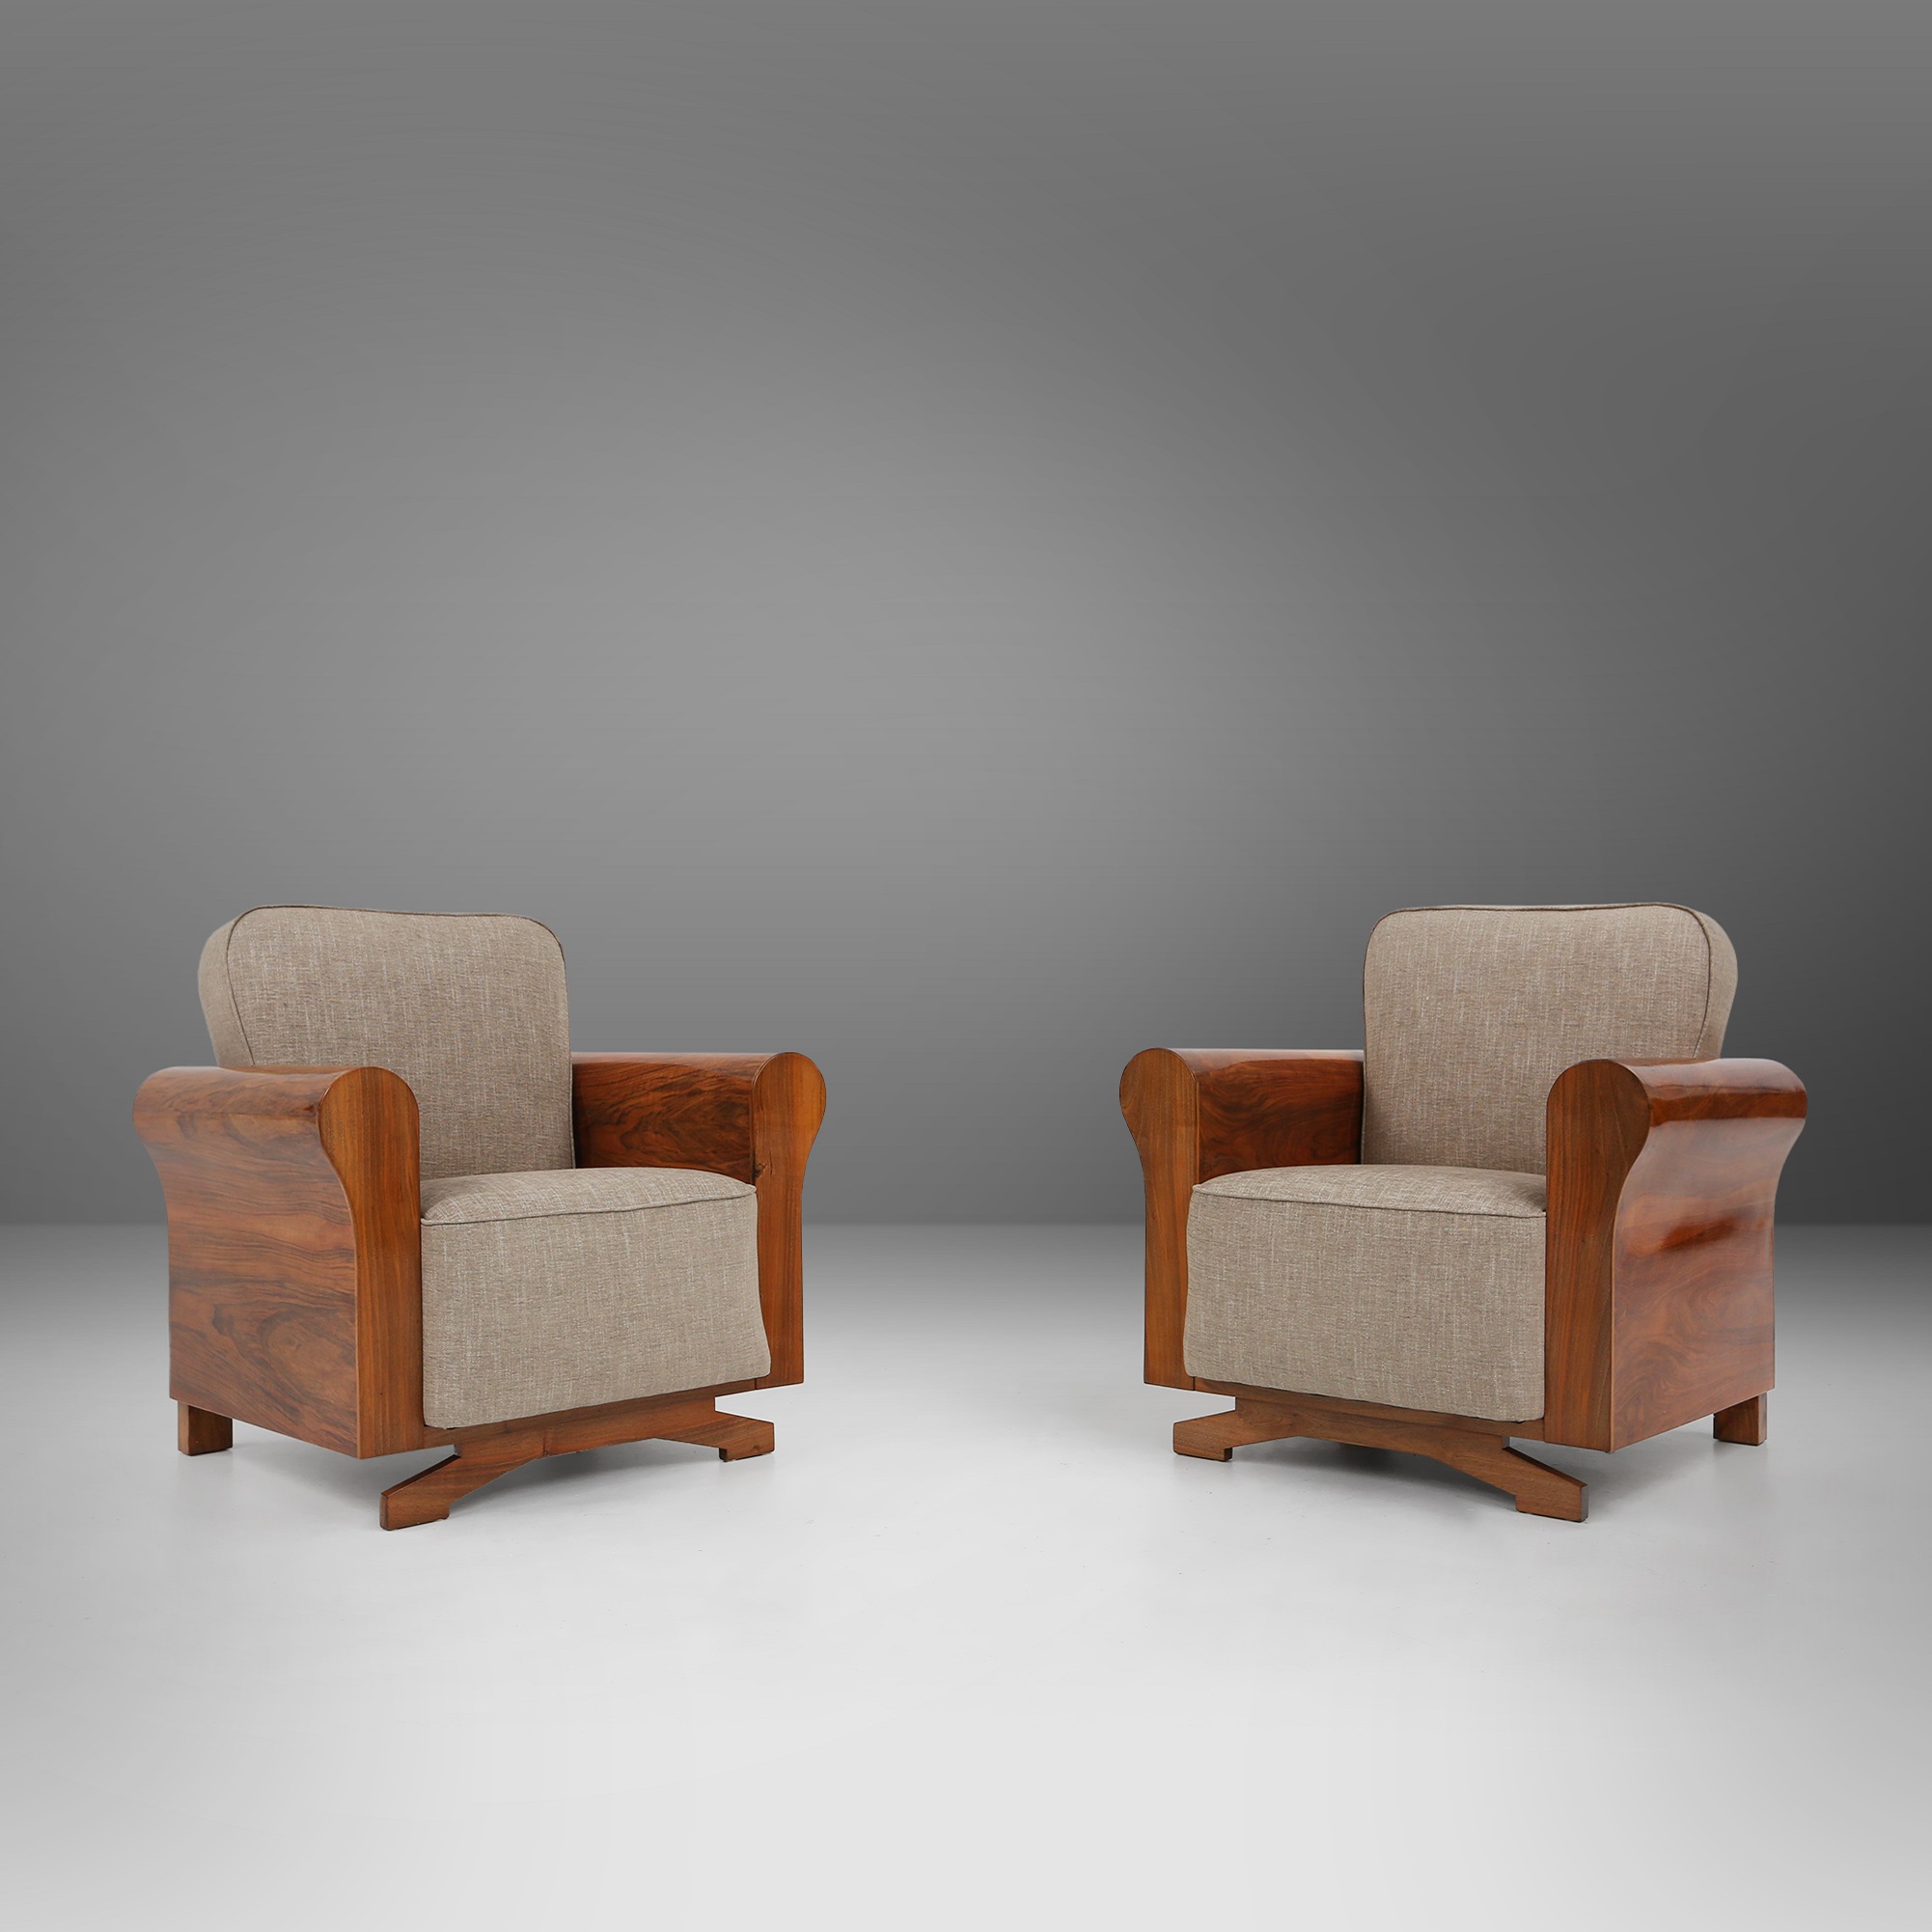 A set of 2 beautiful made Art Deco armchairs with walnut veneer, France, 1930thumbnail